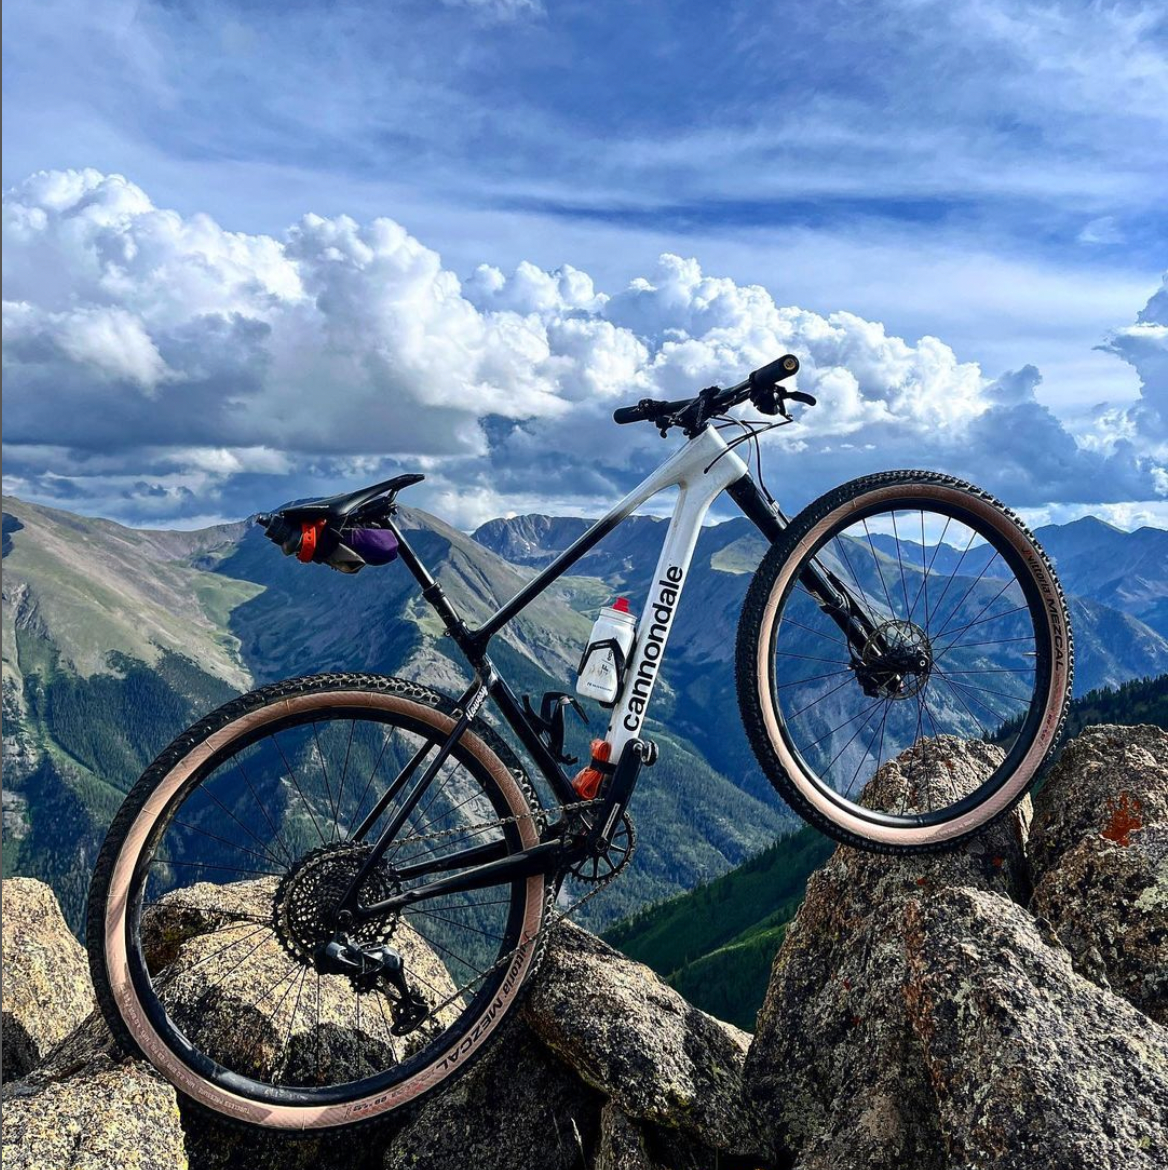 Alex Howe&#039;s bike at the top of a mountain on rocks